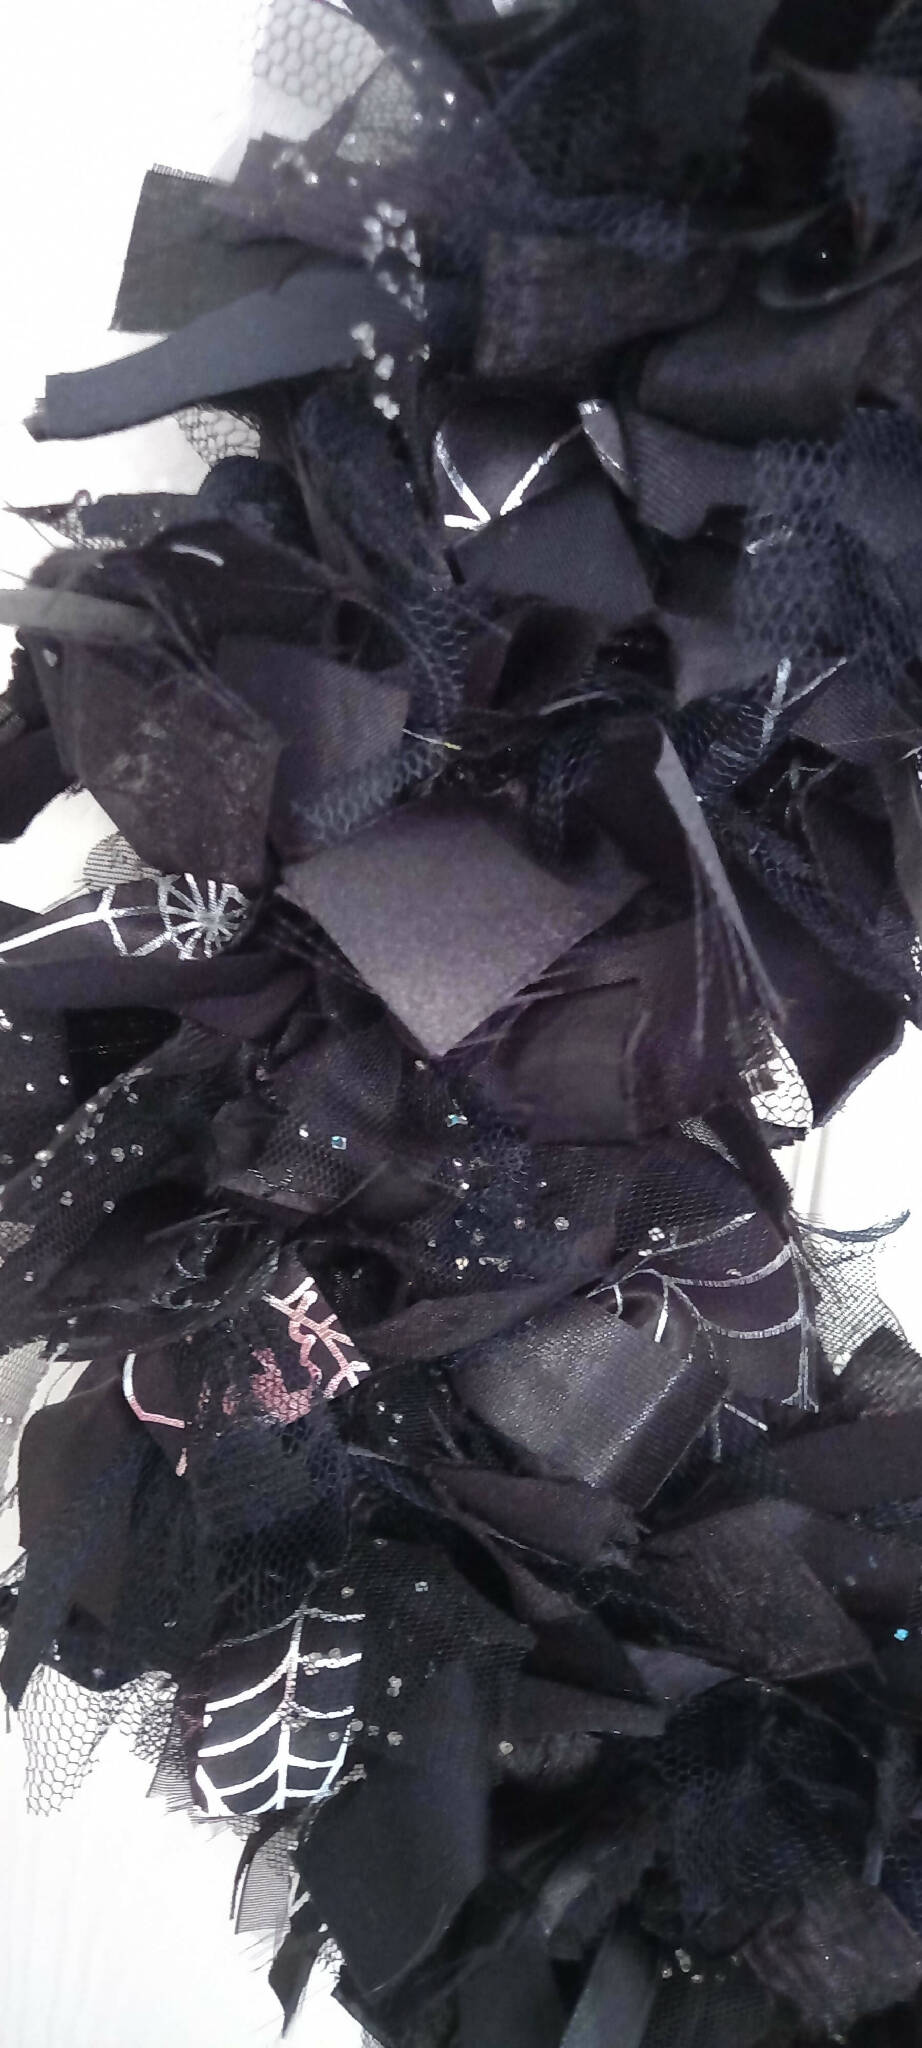 Halloween Rag Wreath in Black and Silver